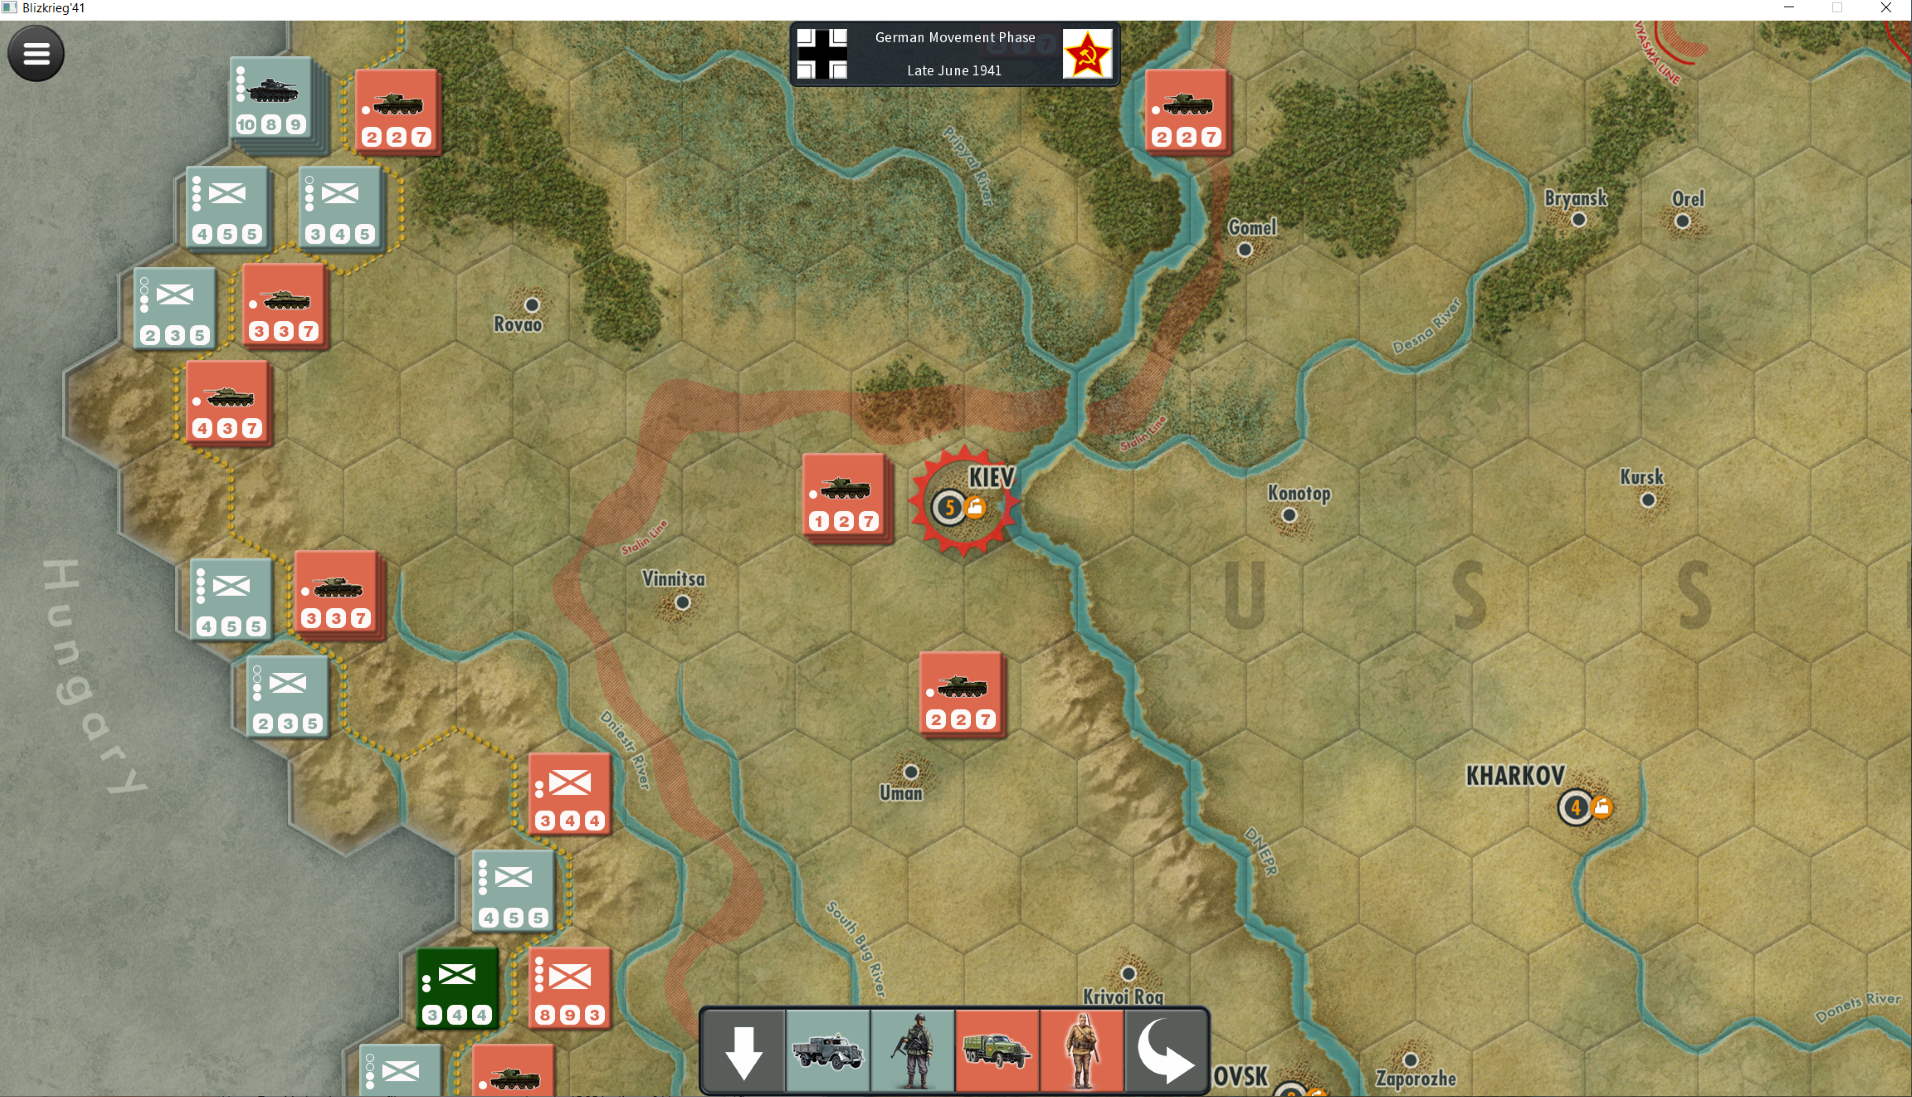 Panzers Exploit to attack Headquarters